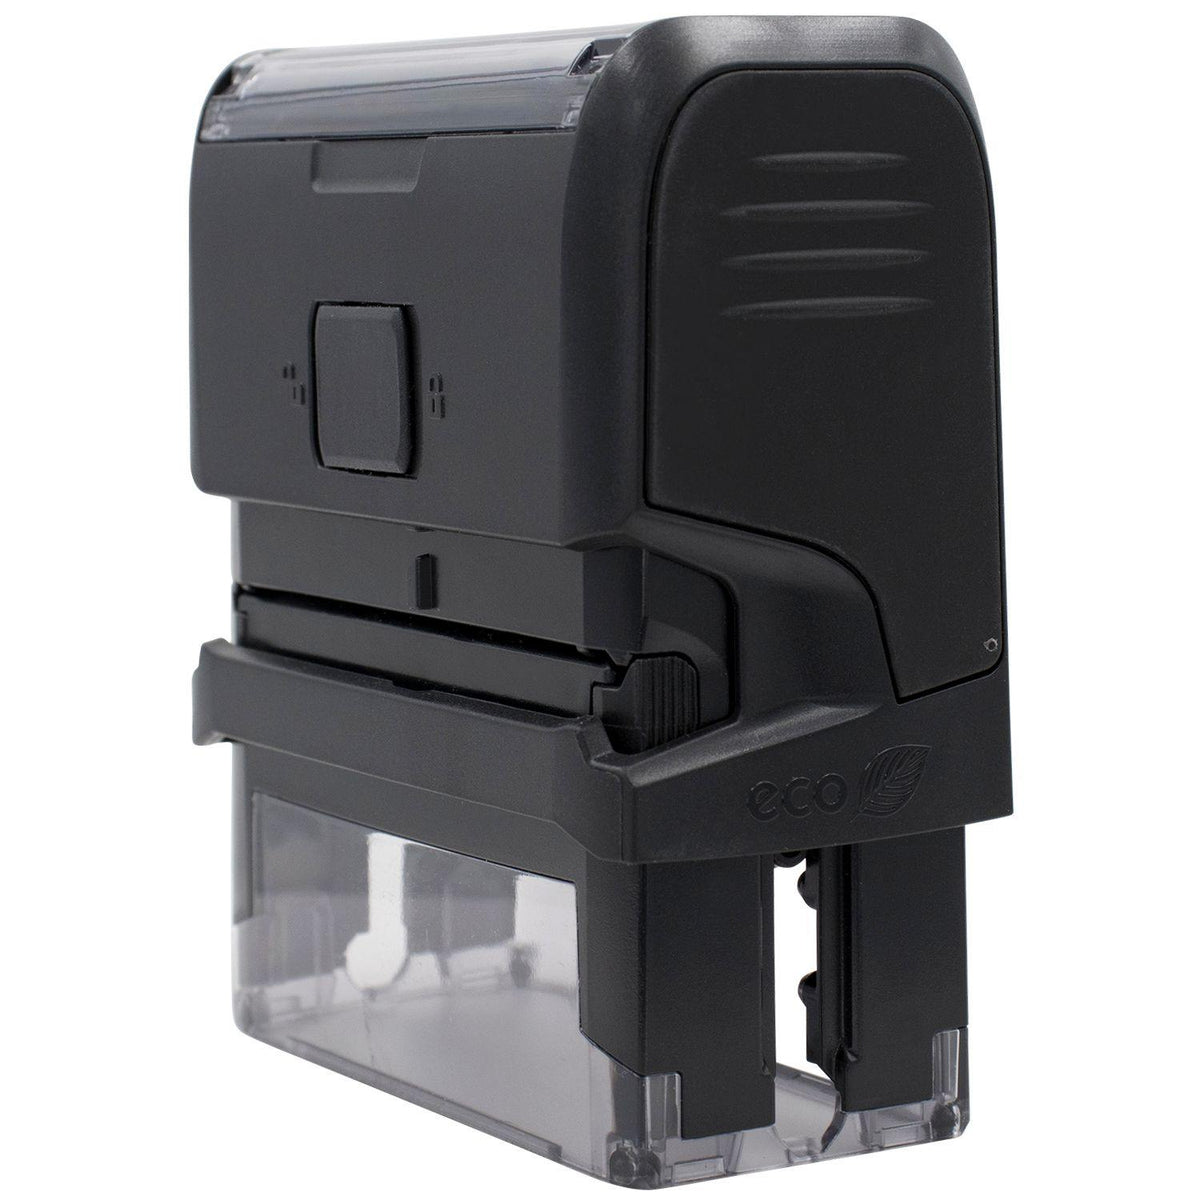 Self-Inking Bold Deceased Stamp - Engineer Seal Stamps - Brand_Trodat, Impression Size_Small, Stamp Type_Self-Inking Stamp, Type of Use_Medical Office